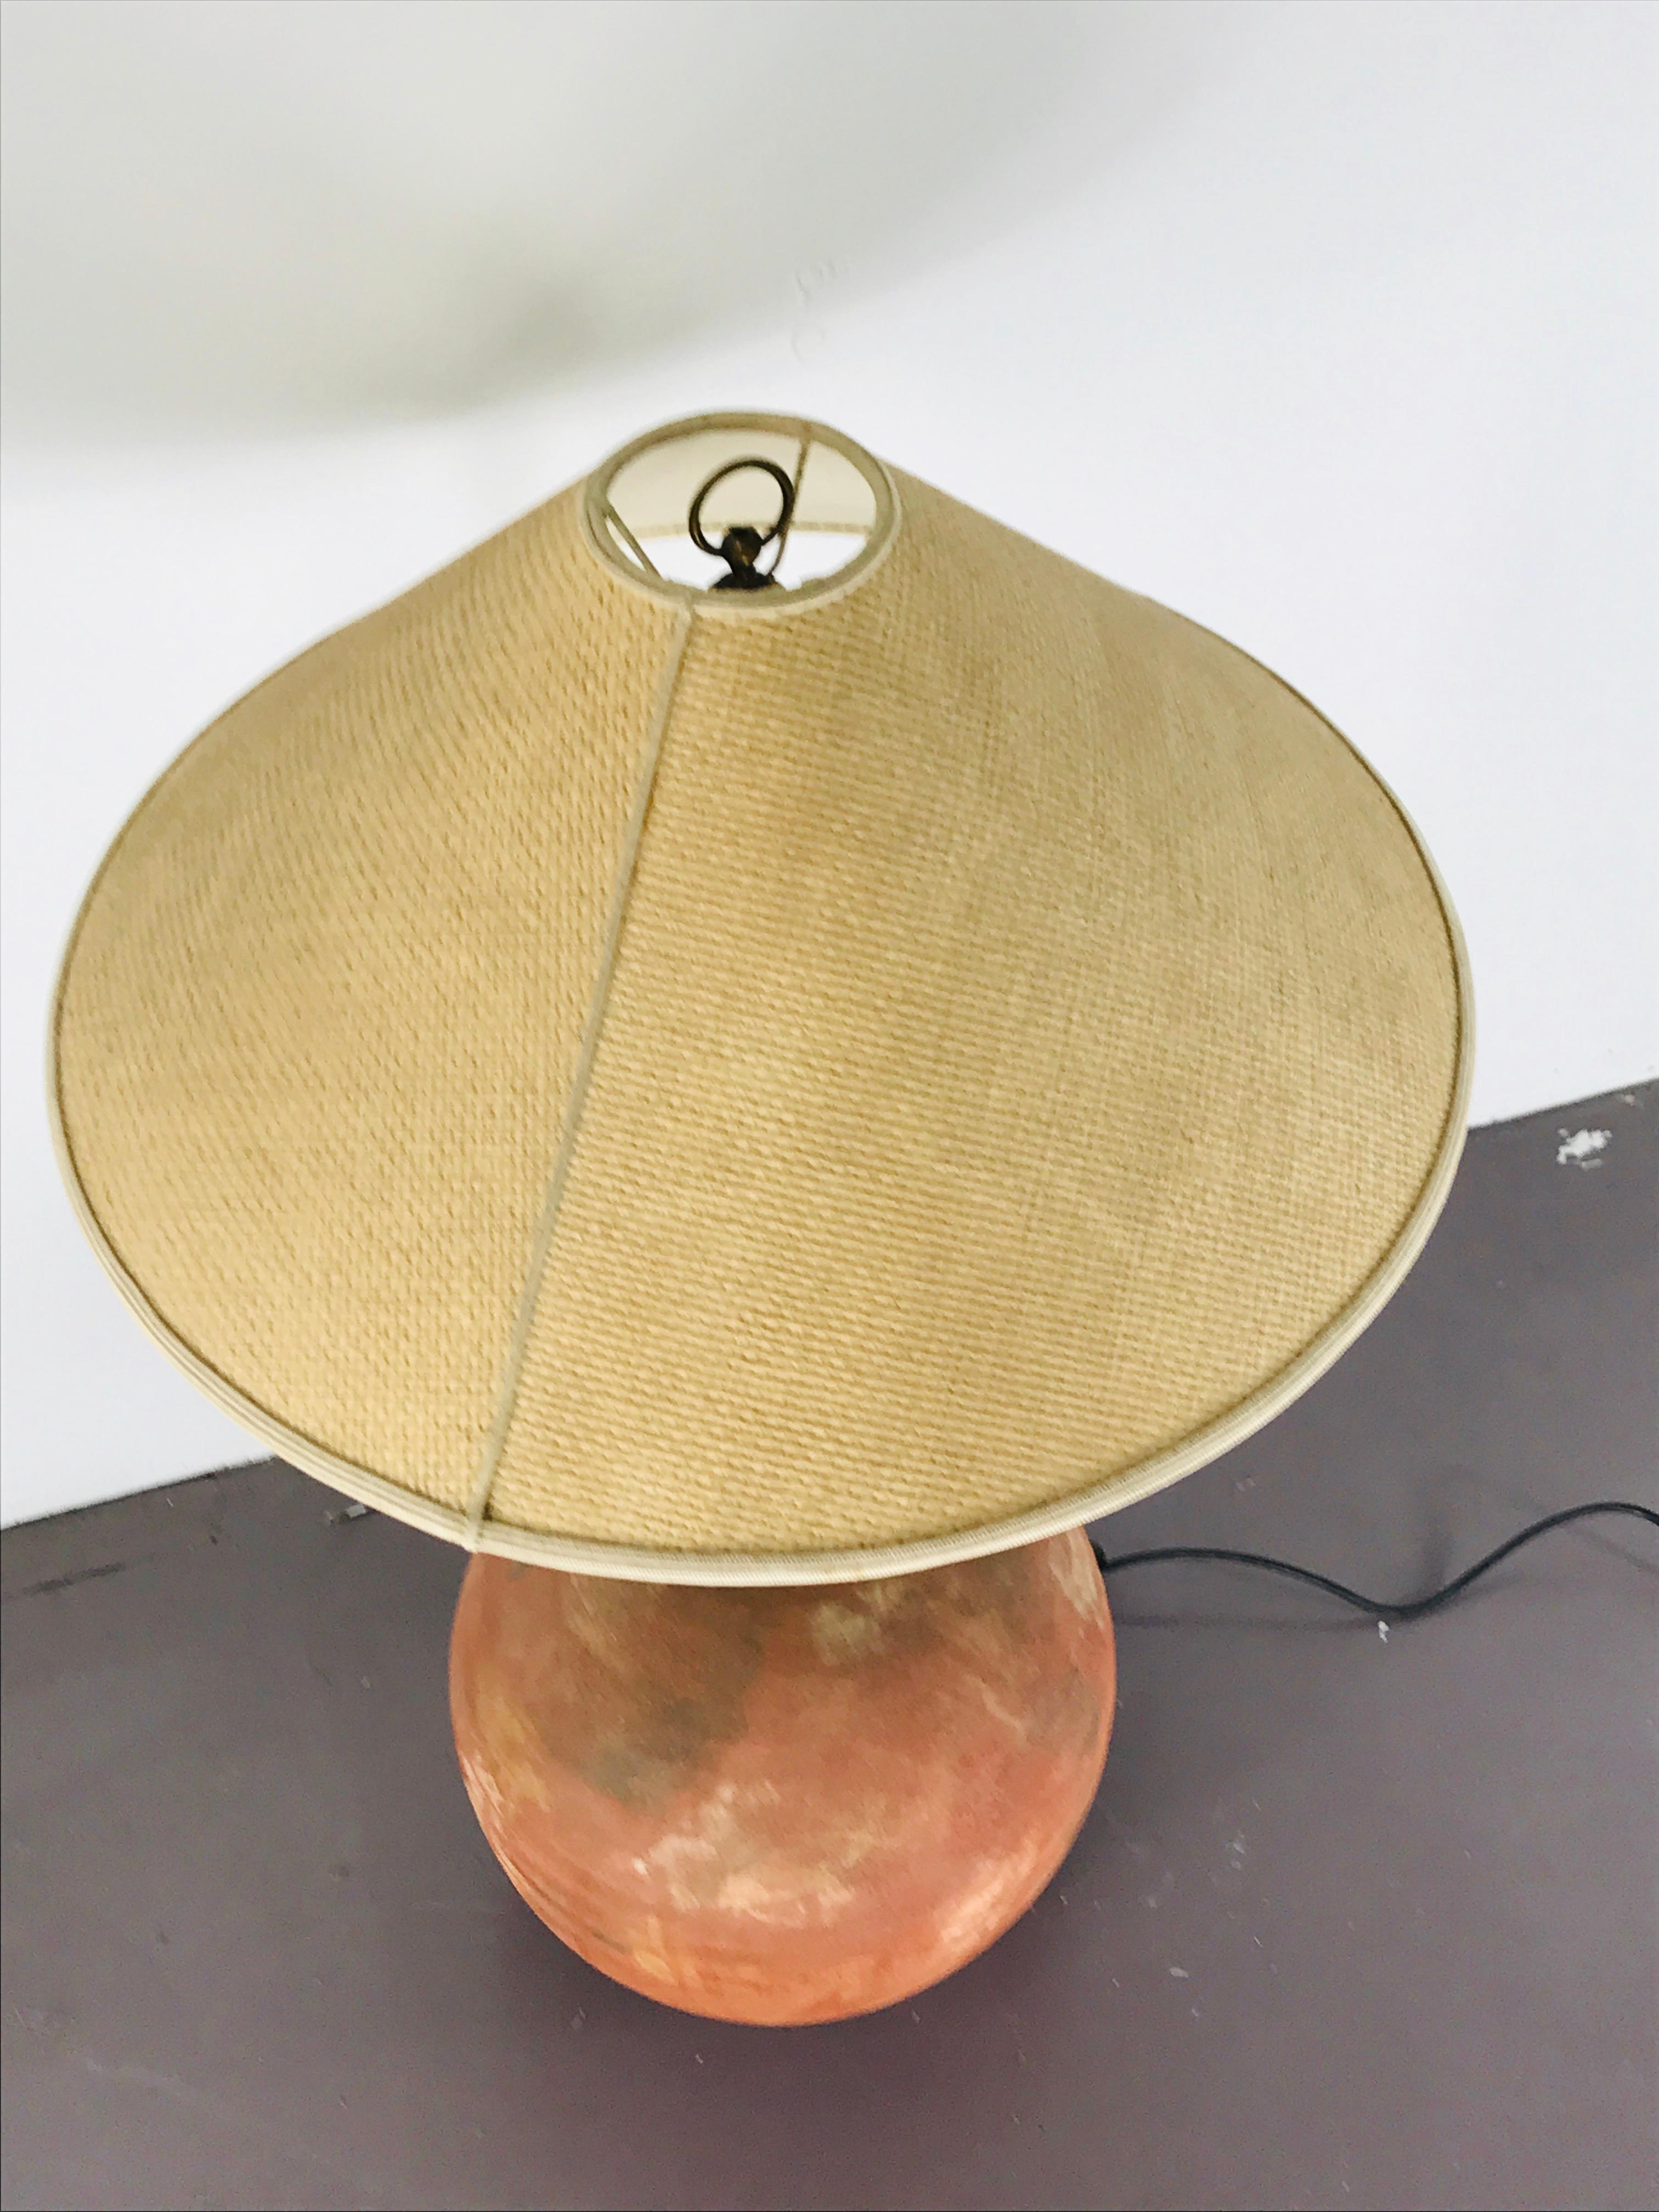 Società Porcellane Artistiche midcentury spherical terracotta Italian floor lamp In Good Condition For Sale In Byron Bay, NSW